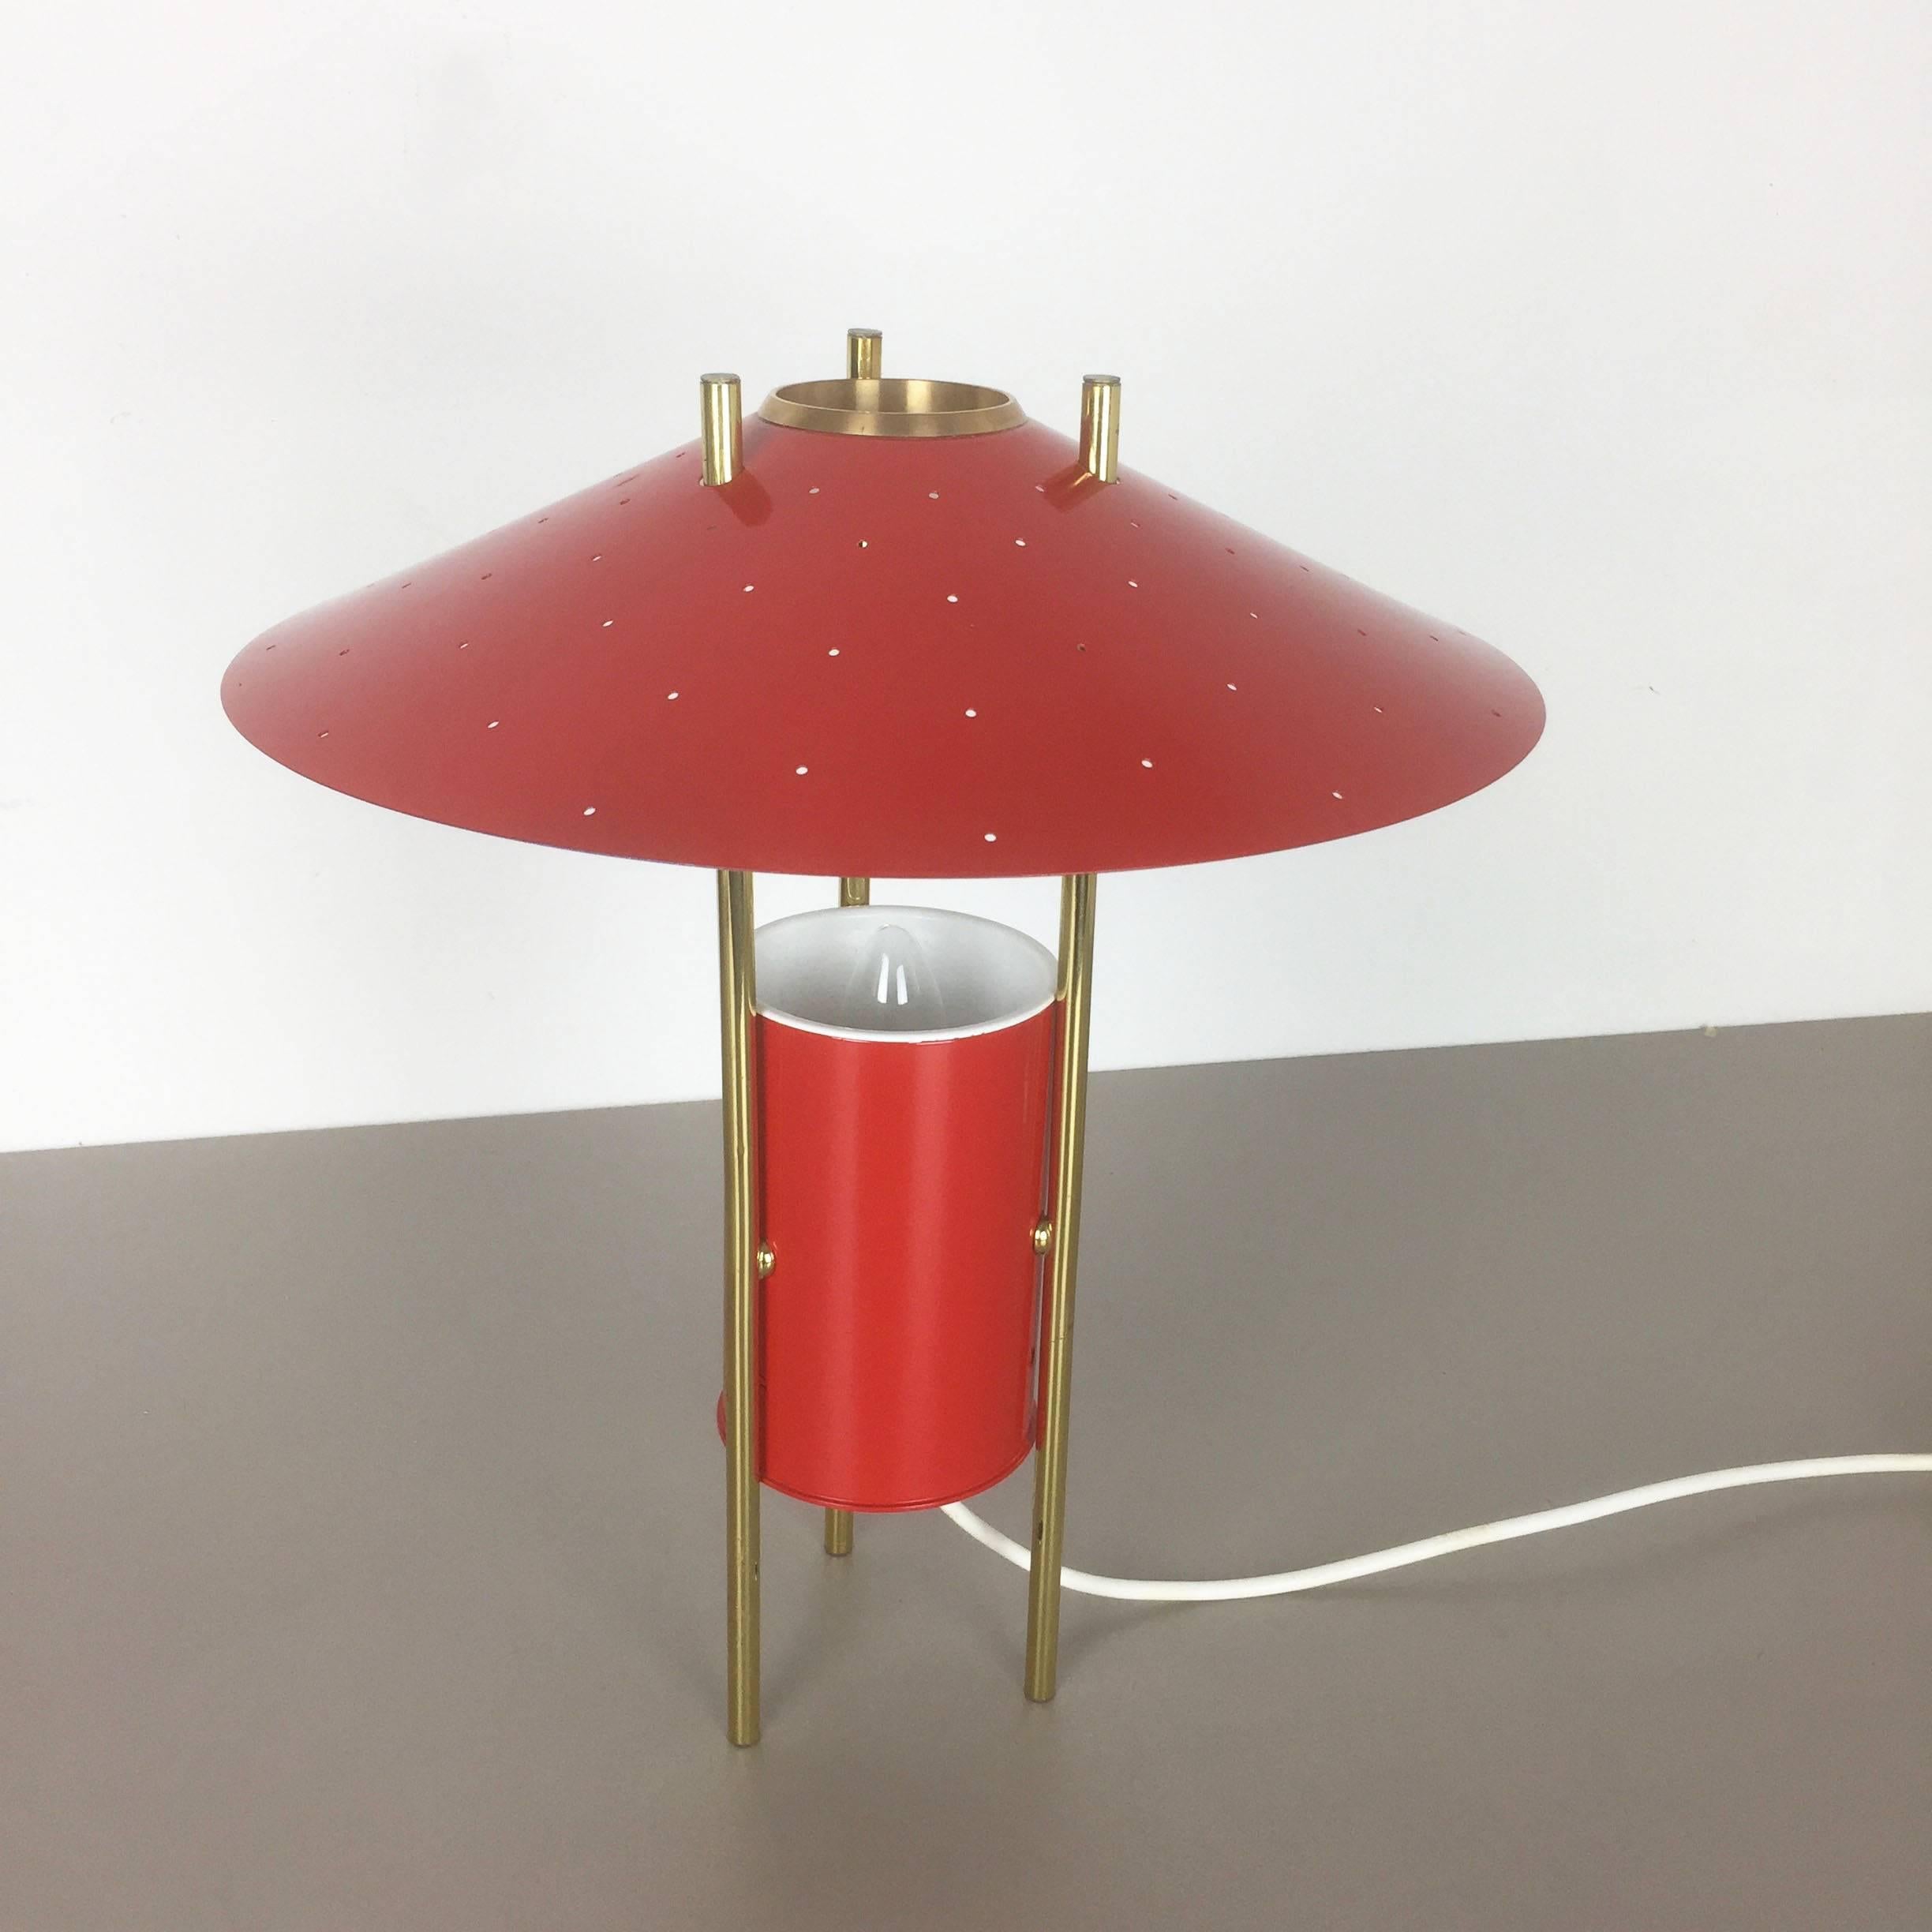 Italian Vintage 1960s Modernist Midcentury Red Tripod Table Light Made in Italy, 1960s